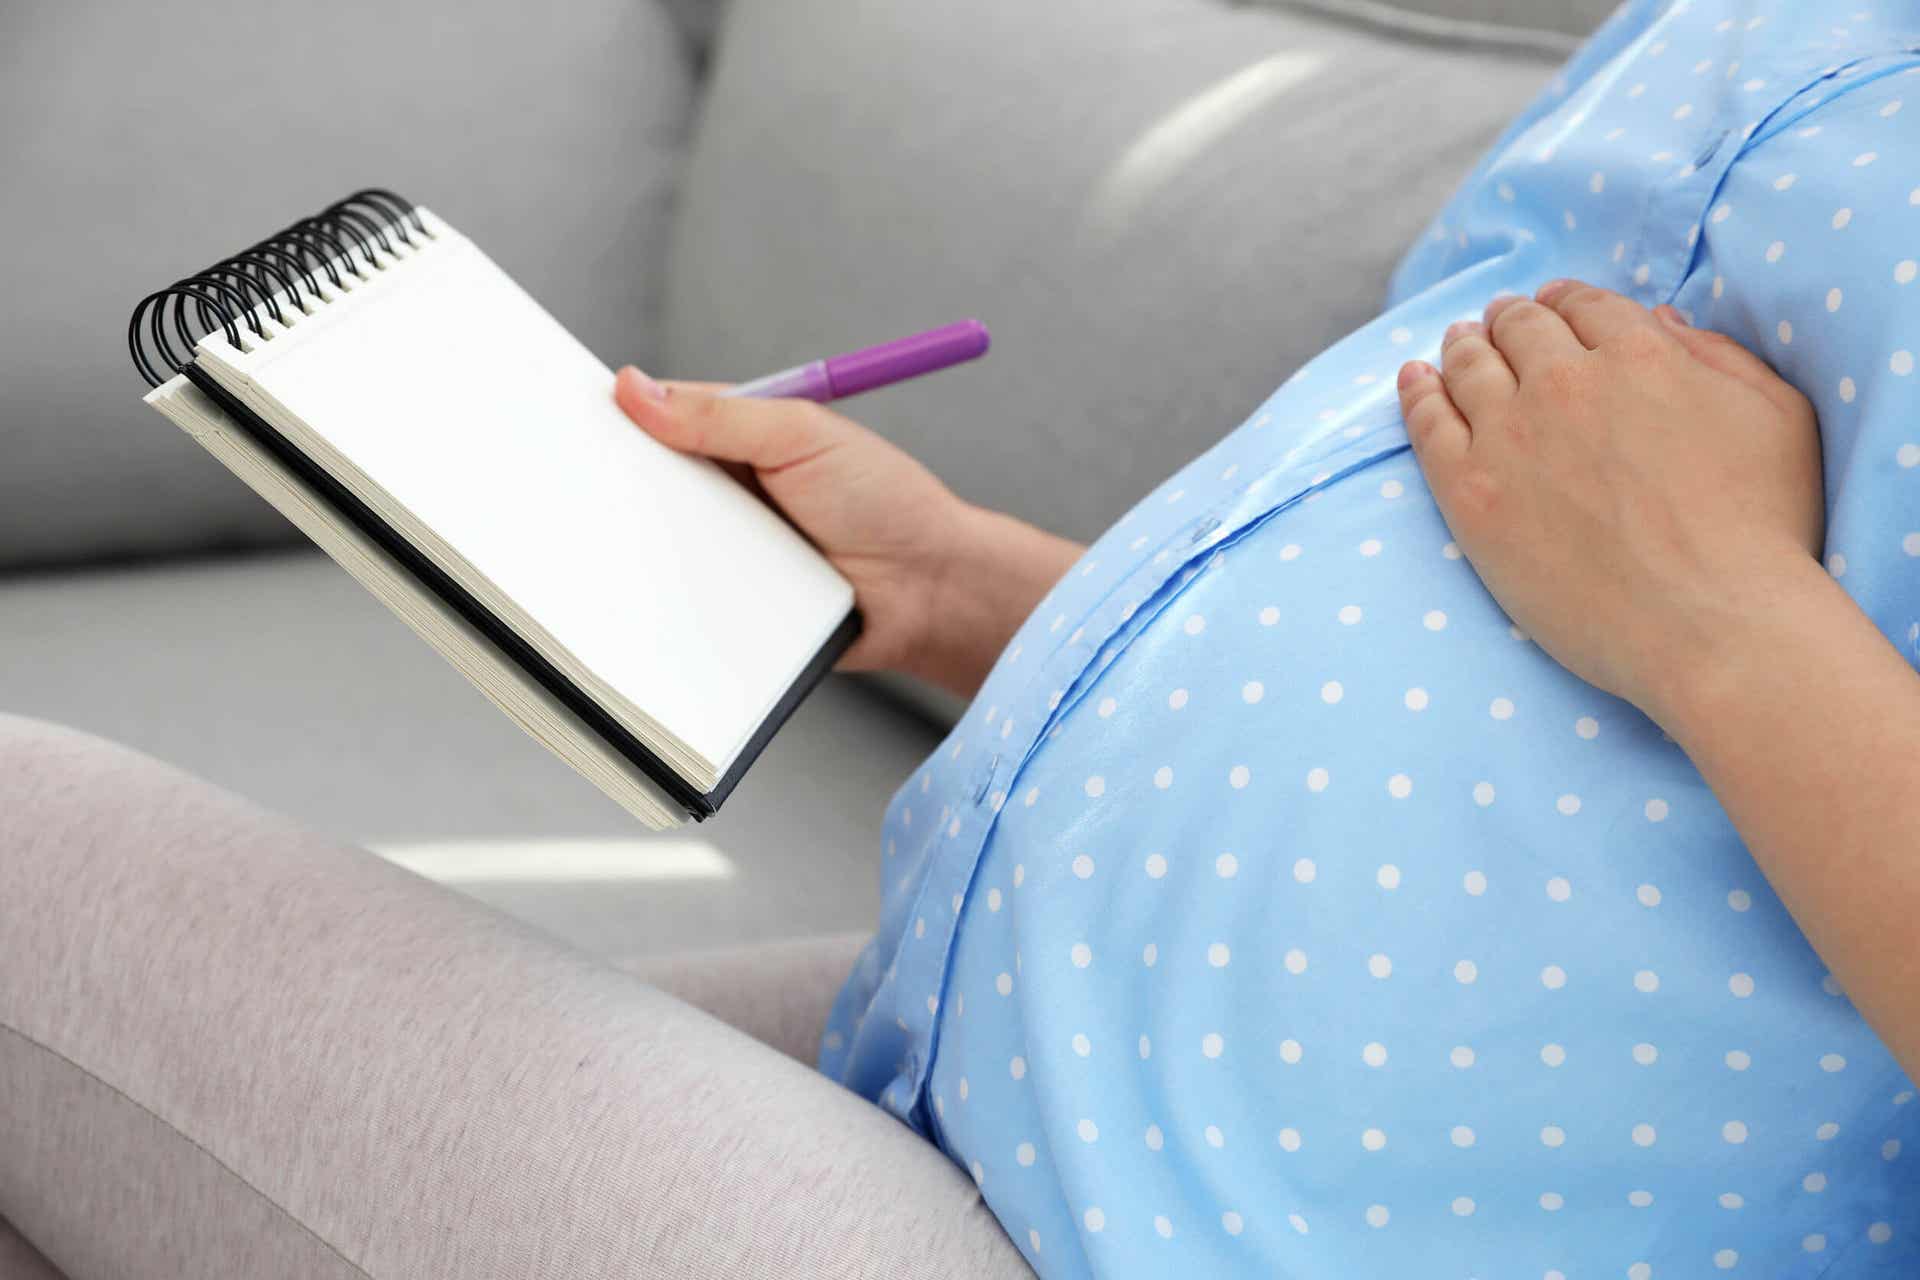 A woman patting her pregnant belly while holding notebook and pen in the other hand.